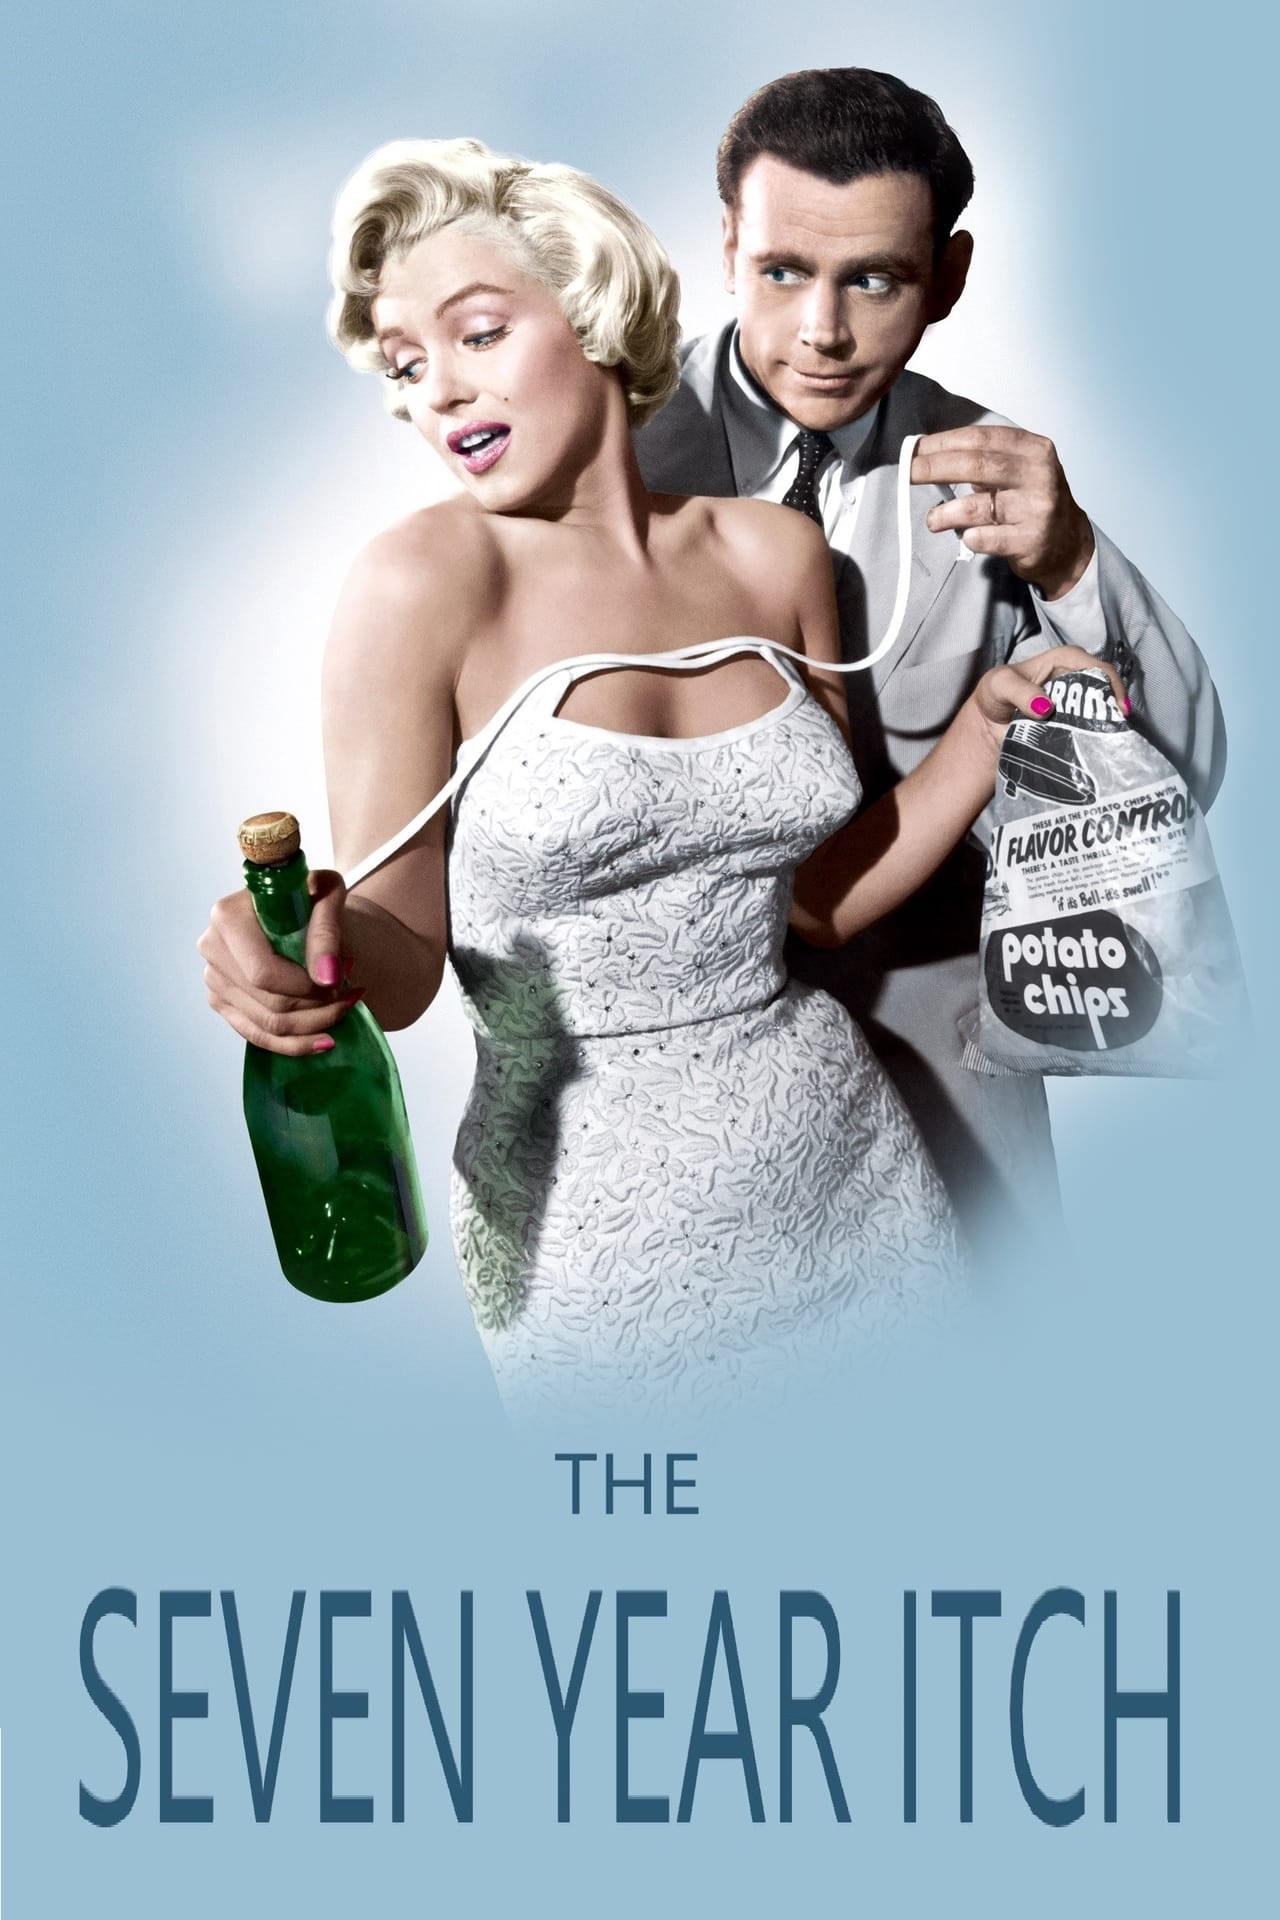 The Seven Year Itch Movie Synopsis, Summary, Plot & Film Details